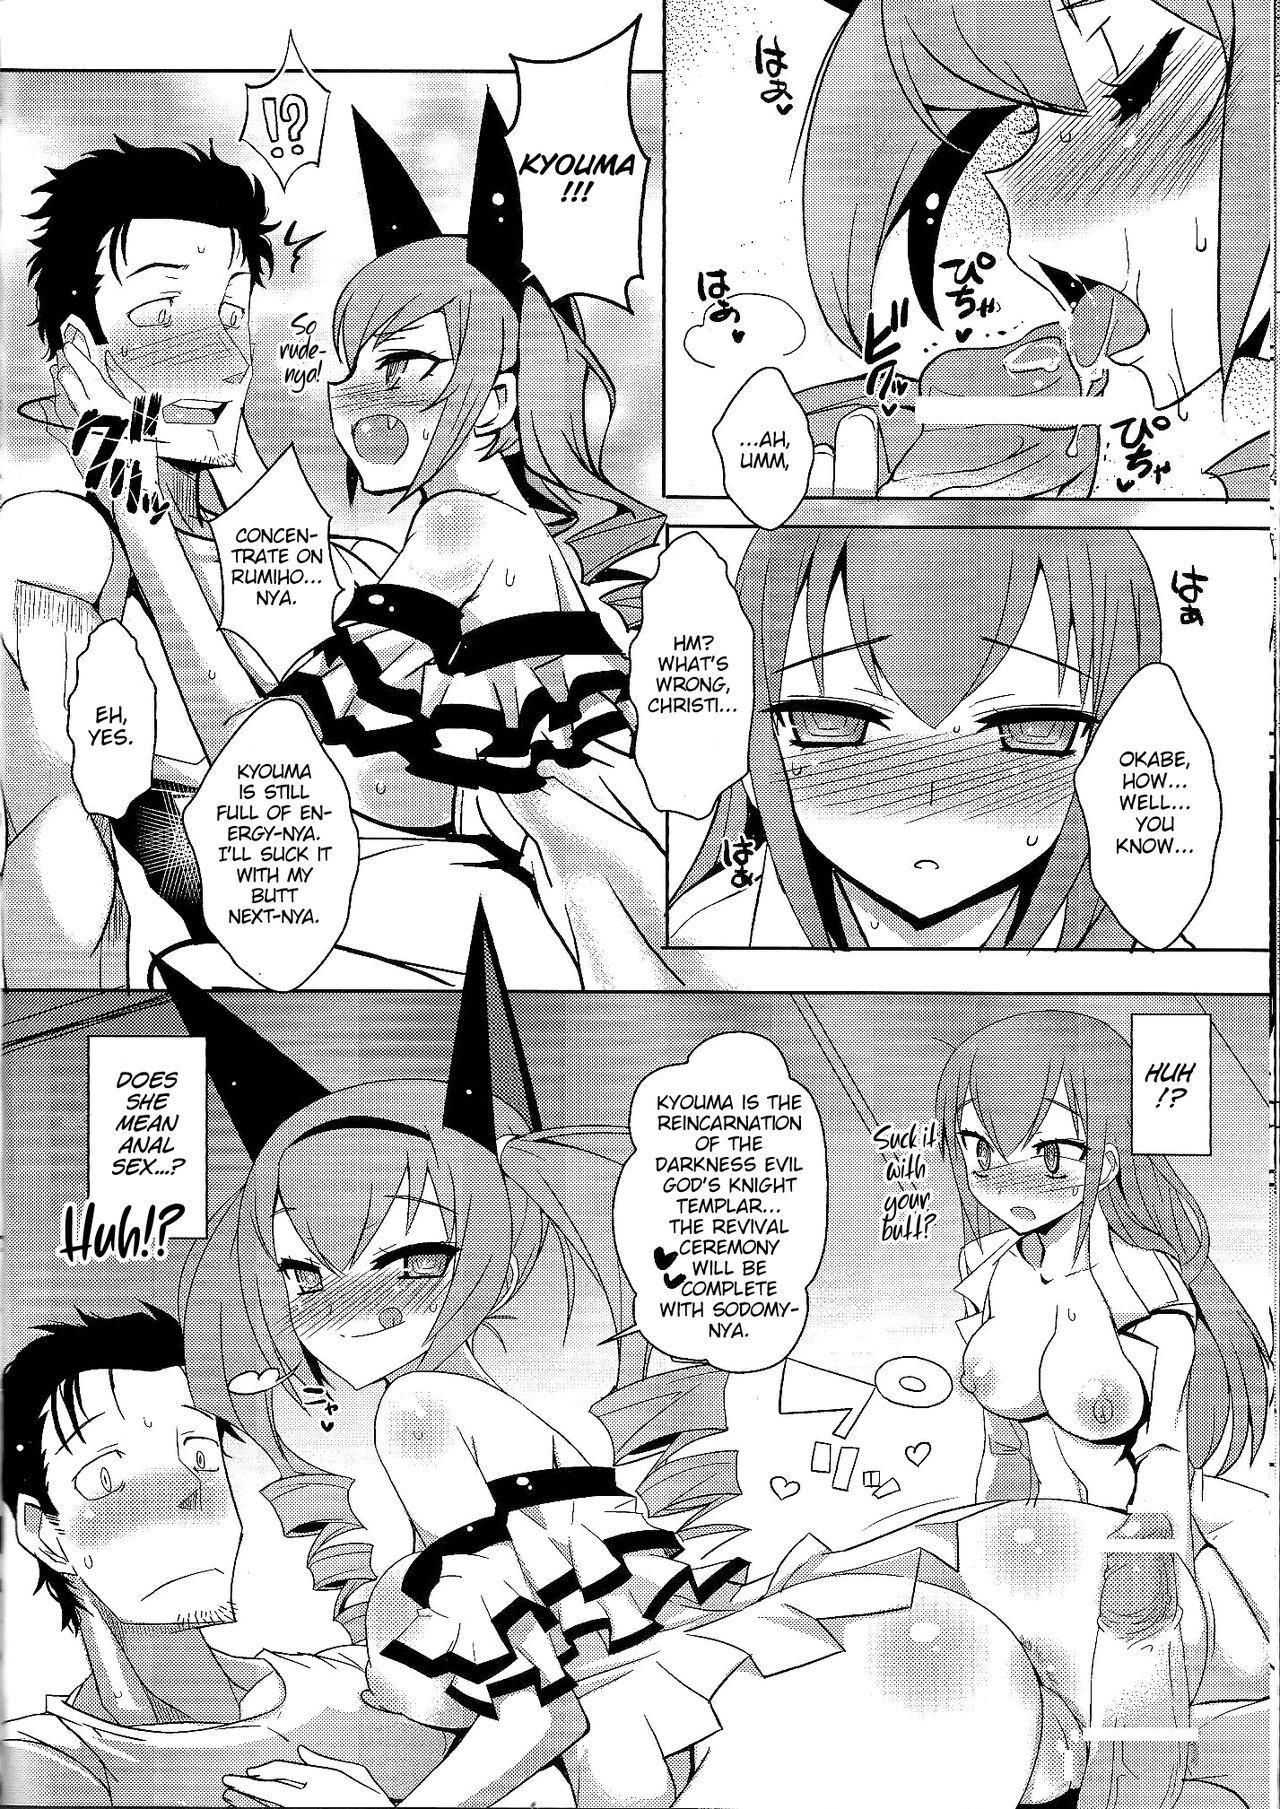 Cuckolding Kenjin Chijou no Sodoministers - Steinsgate Job - Page 11